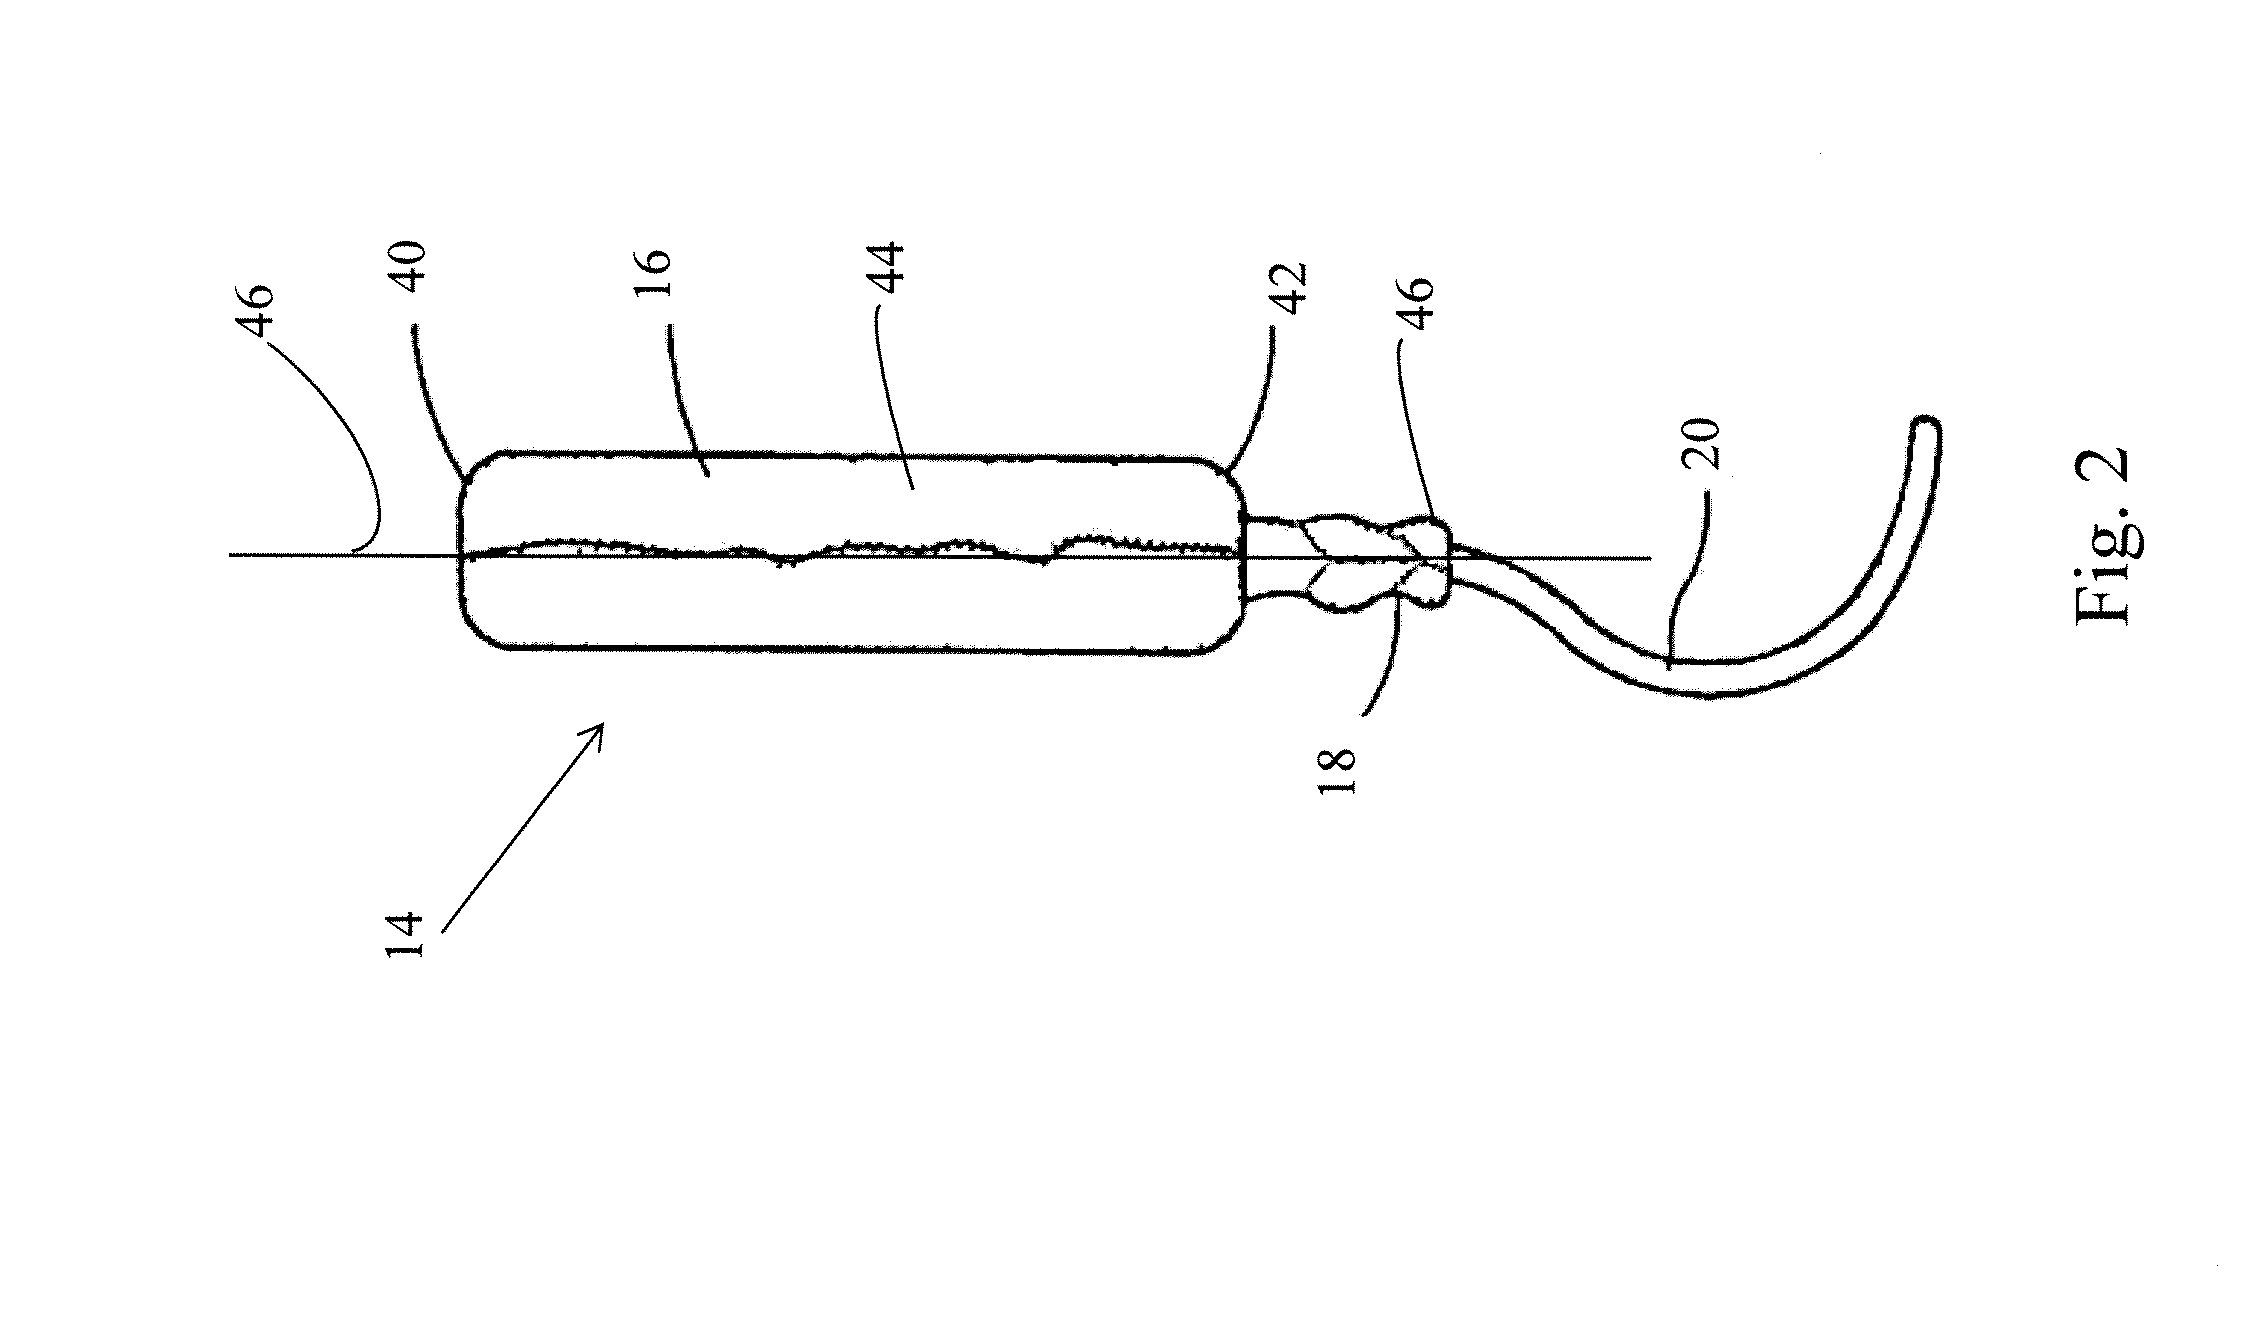 Package of visually perceptible tampons housed within applicators